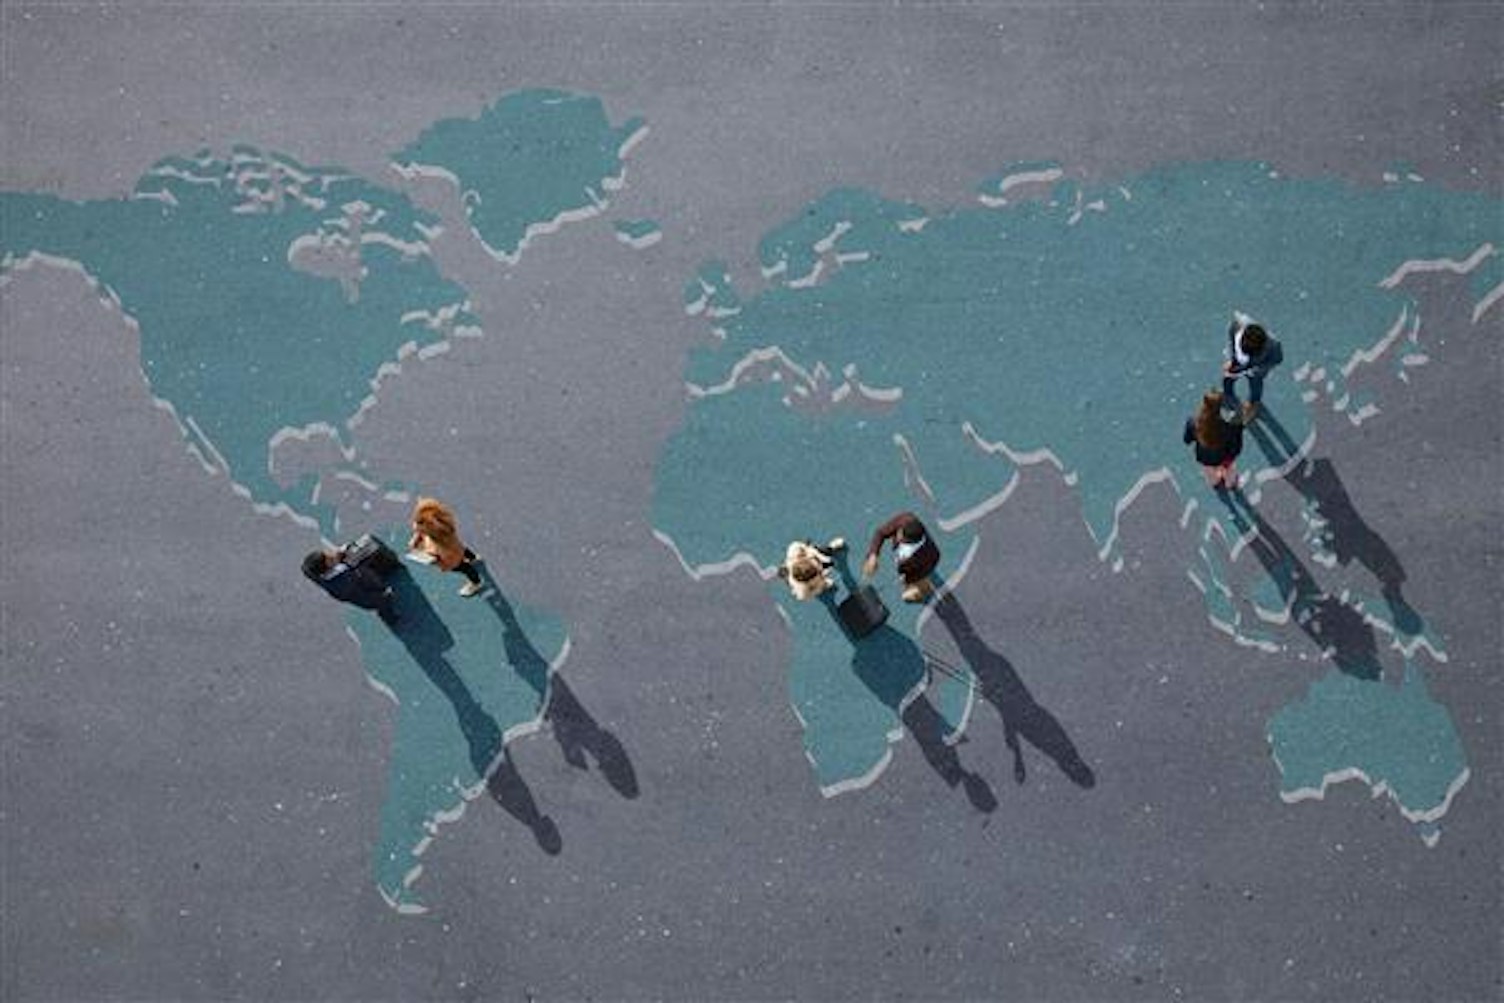 large Business people Standing on Painted World Map